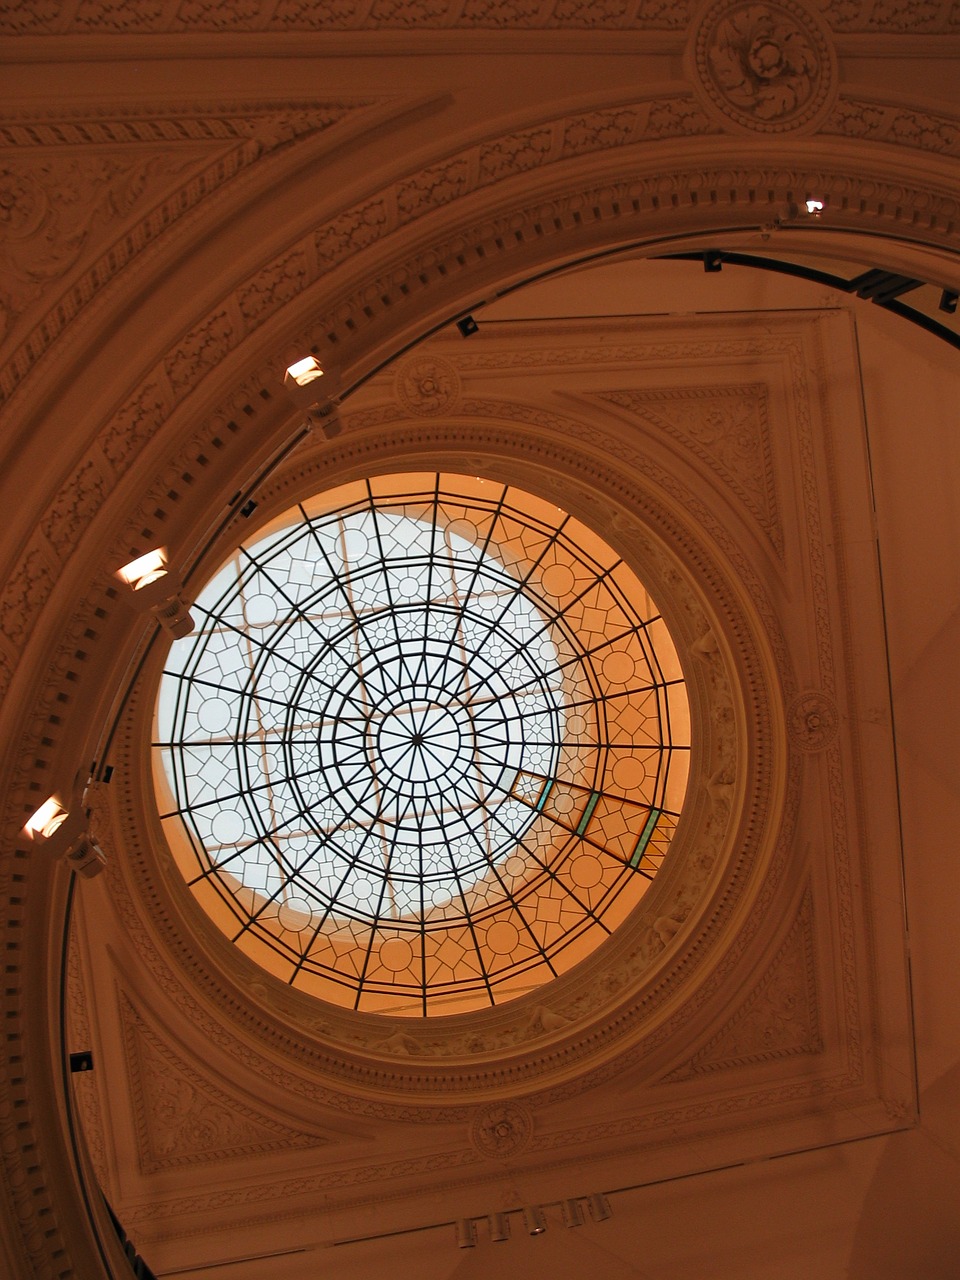 department store ceiling berlin free photo